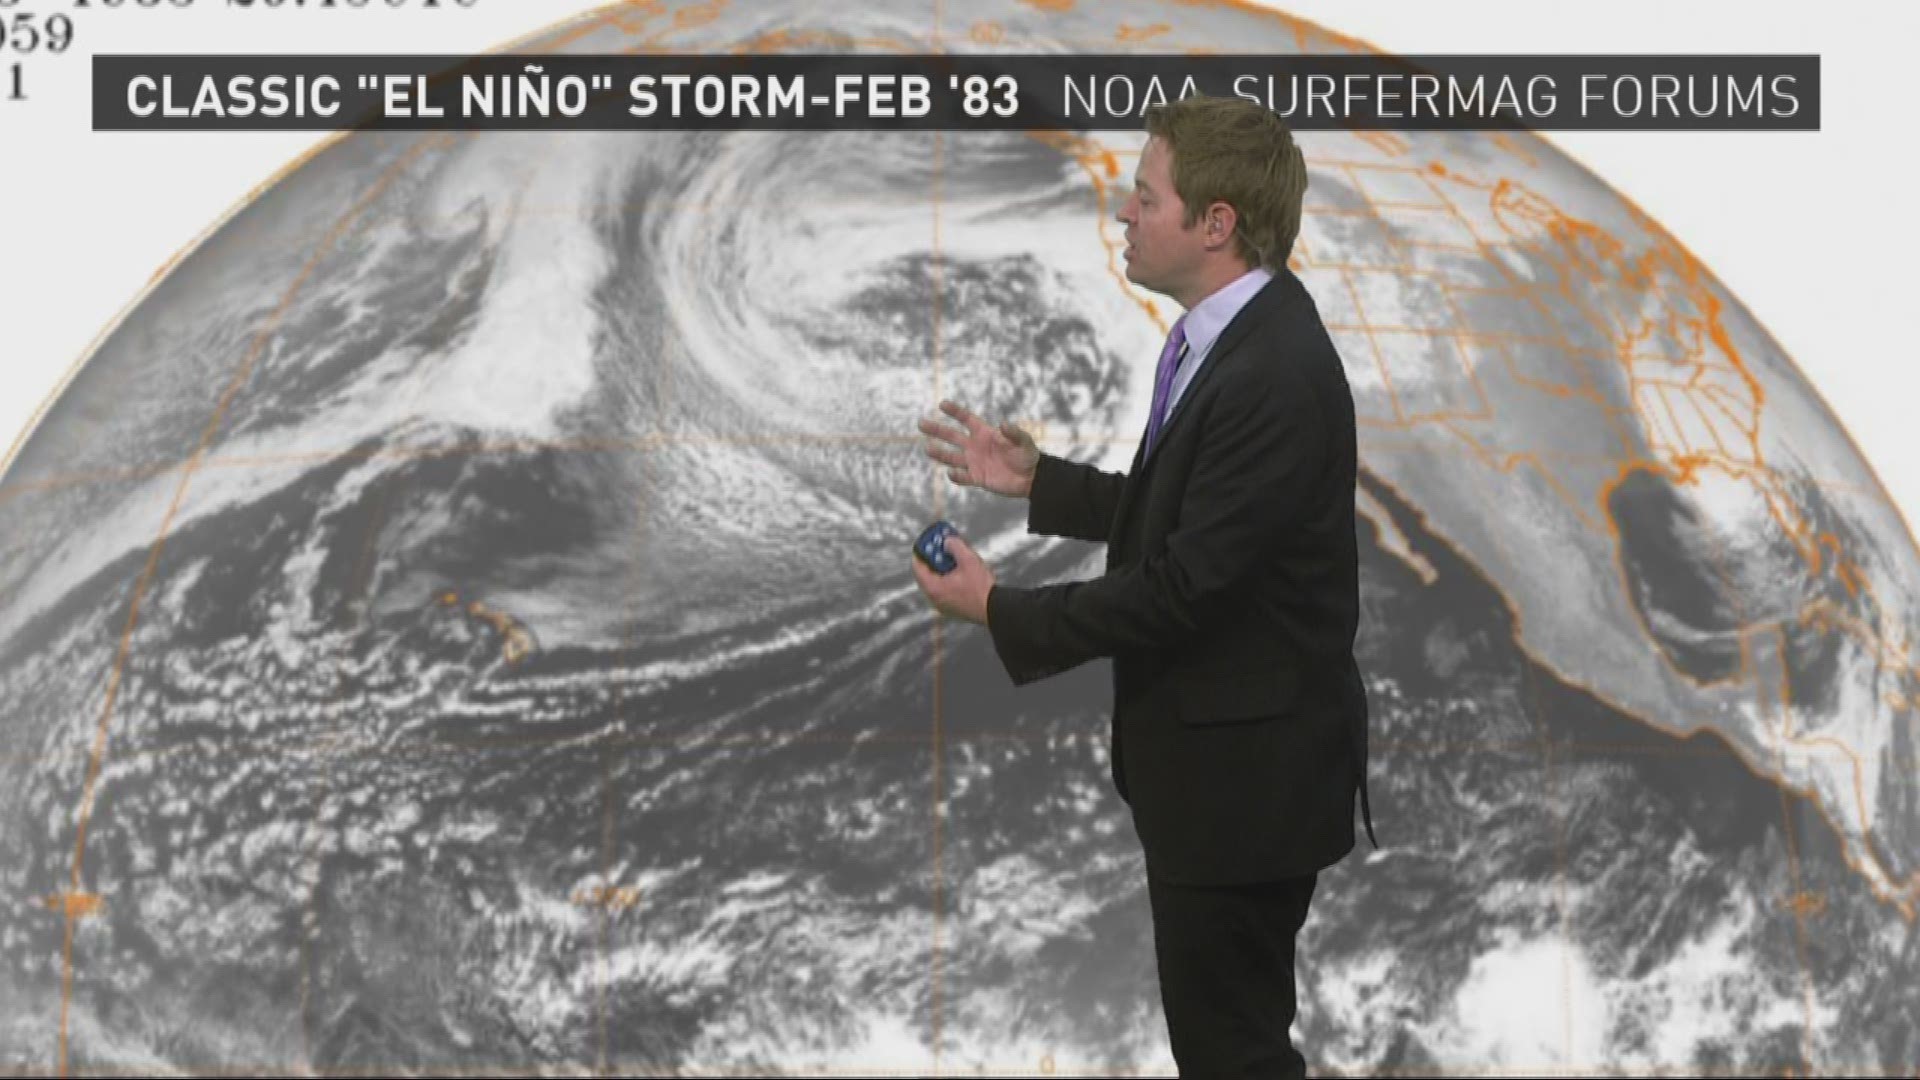 A look at the latest information about the El Nino system forming in the Pacific that will impact California's weather. November 23, 2015